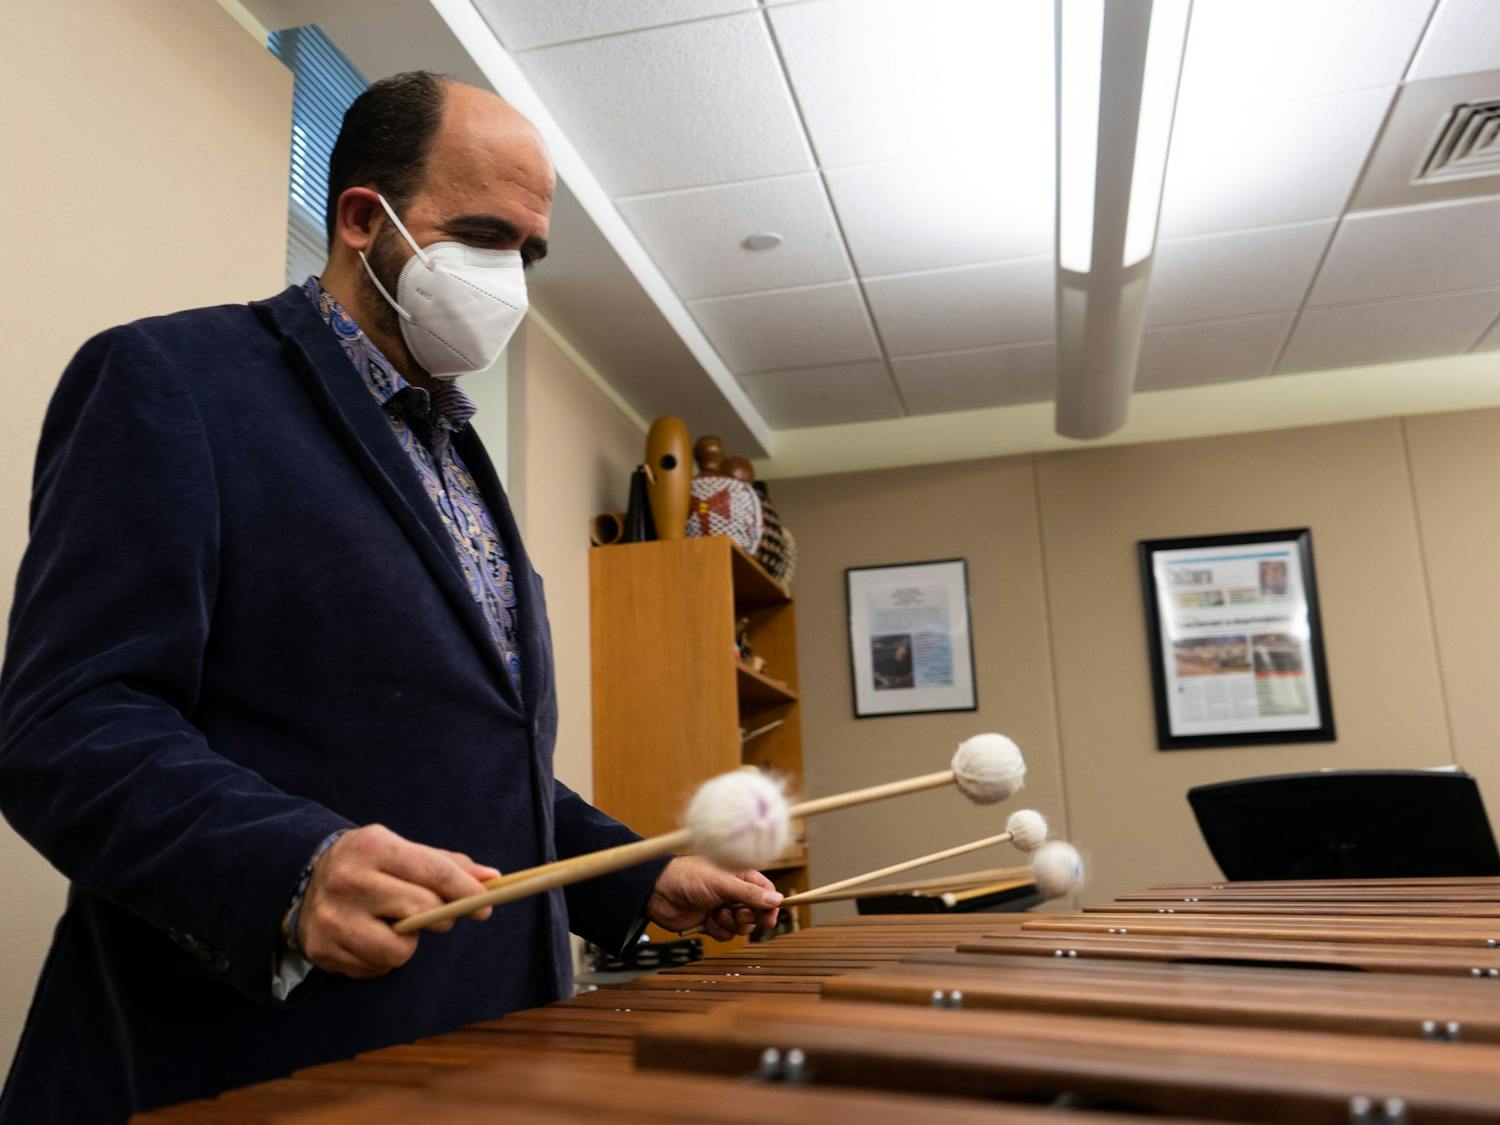 Professor Juan Álamo plays the xylophone in the Kenan Music Building on Jan. 20, 2022. Álamo has been appointed as a distinguished term associate professor in the department of music.